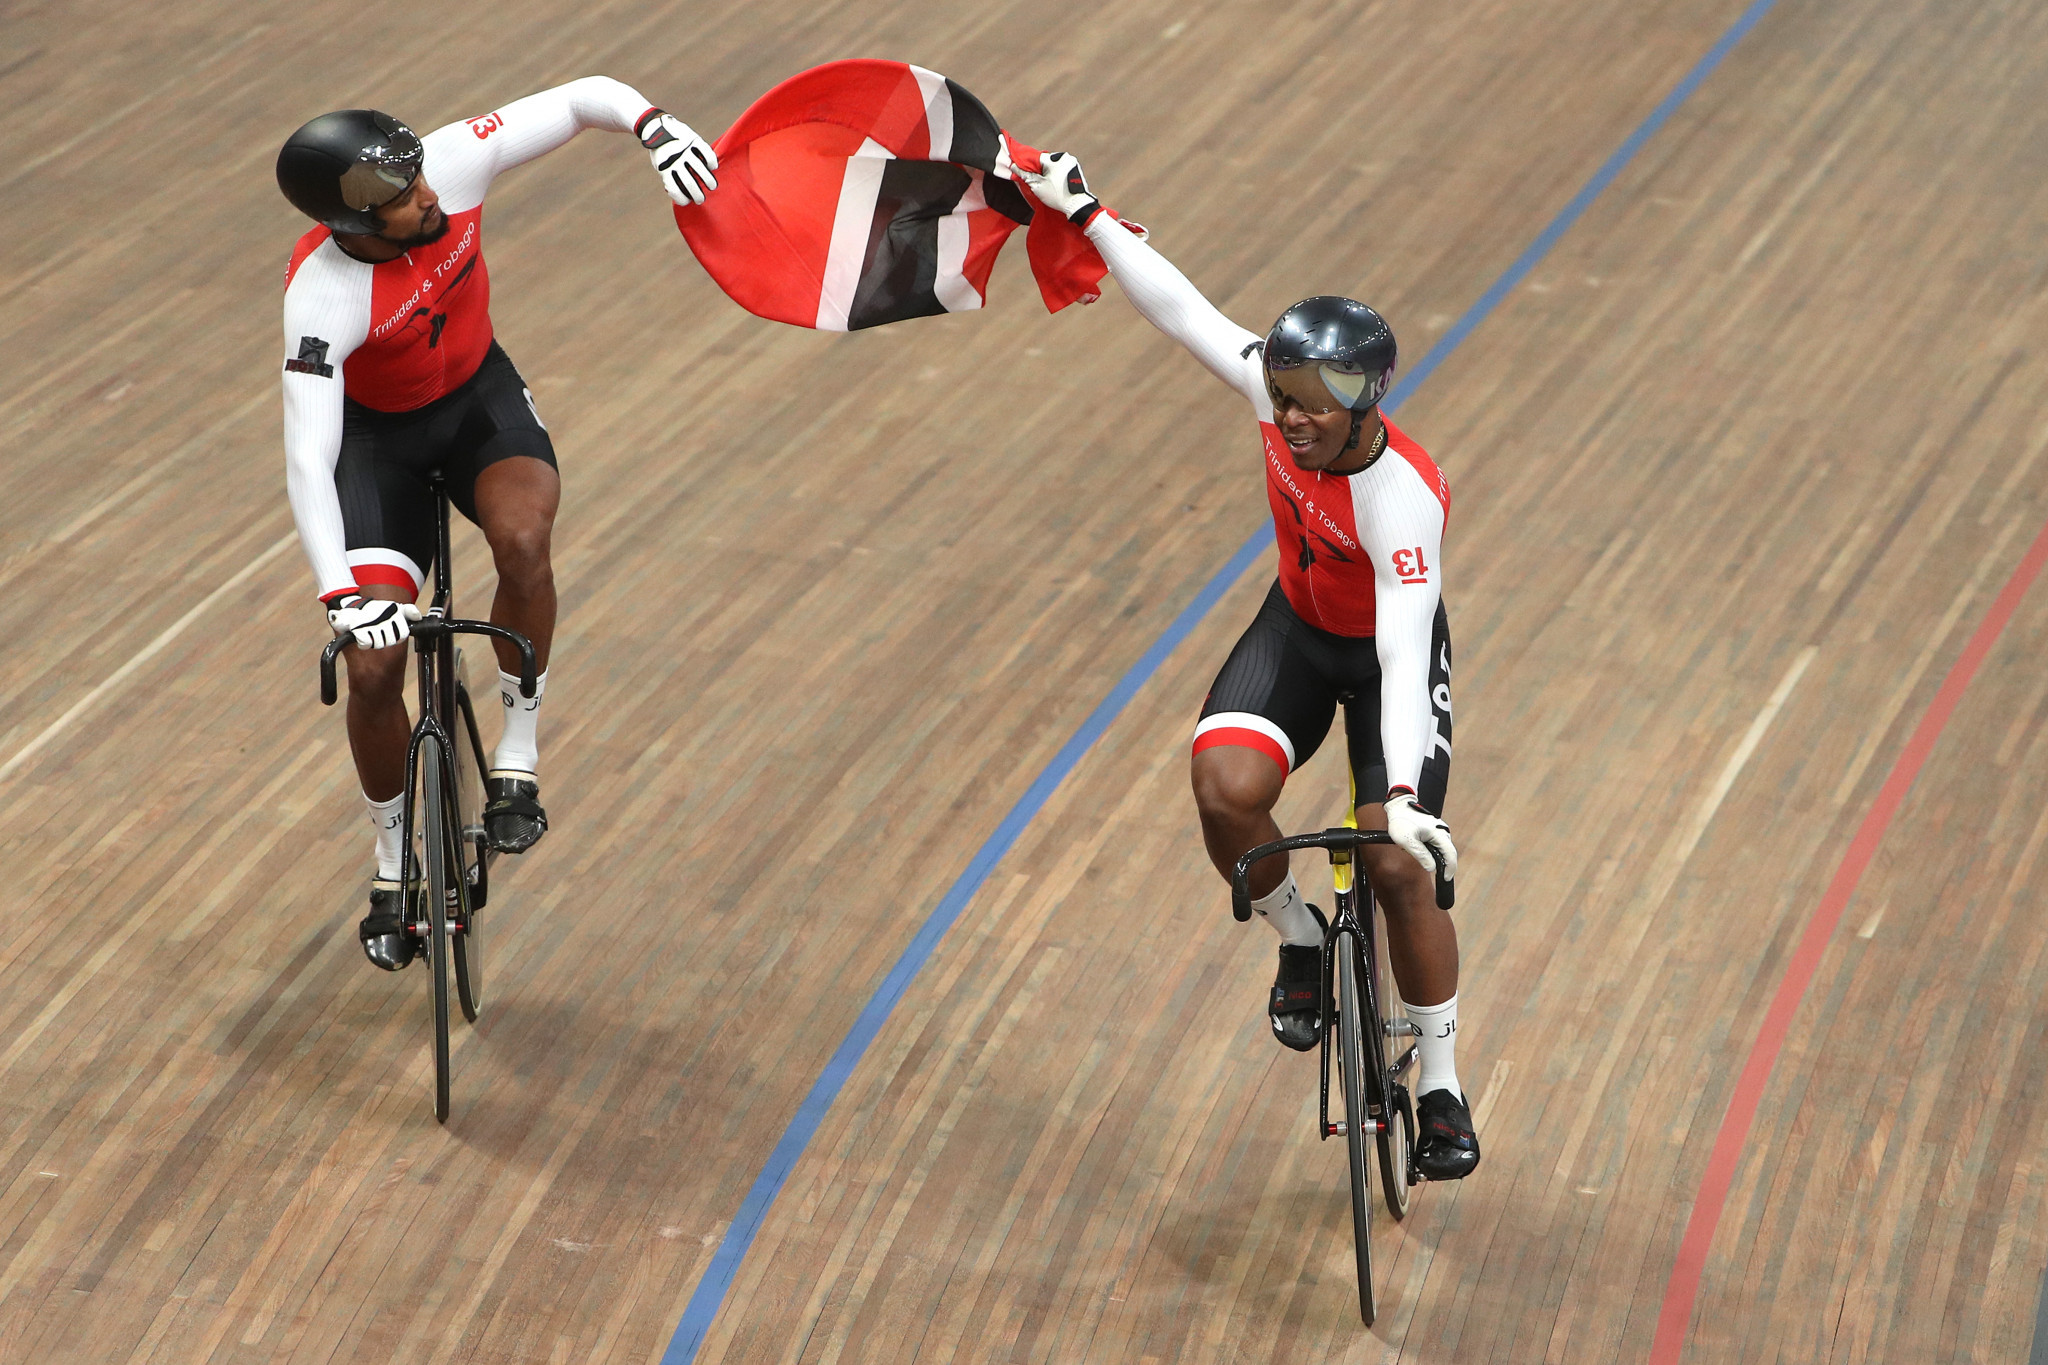 Trinidad and Tobago clinch first gold at Lima 2019 as team sprinters triumph